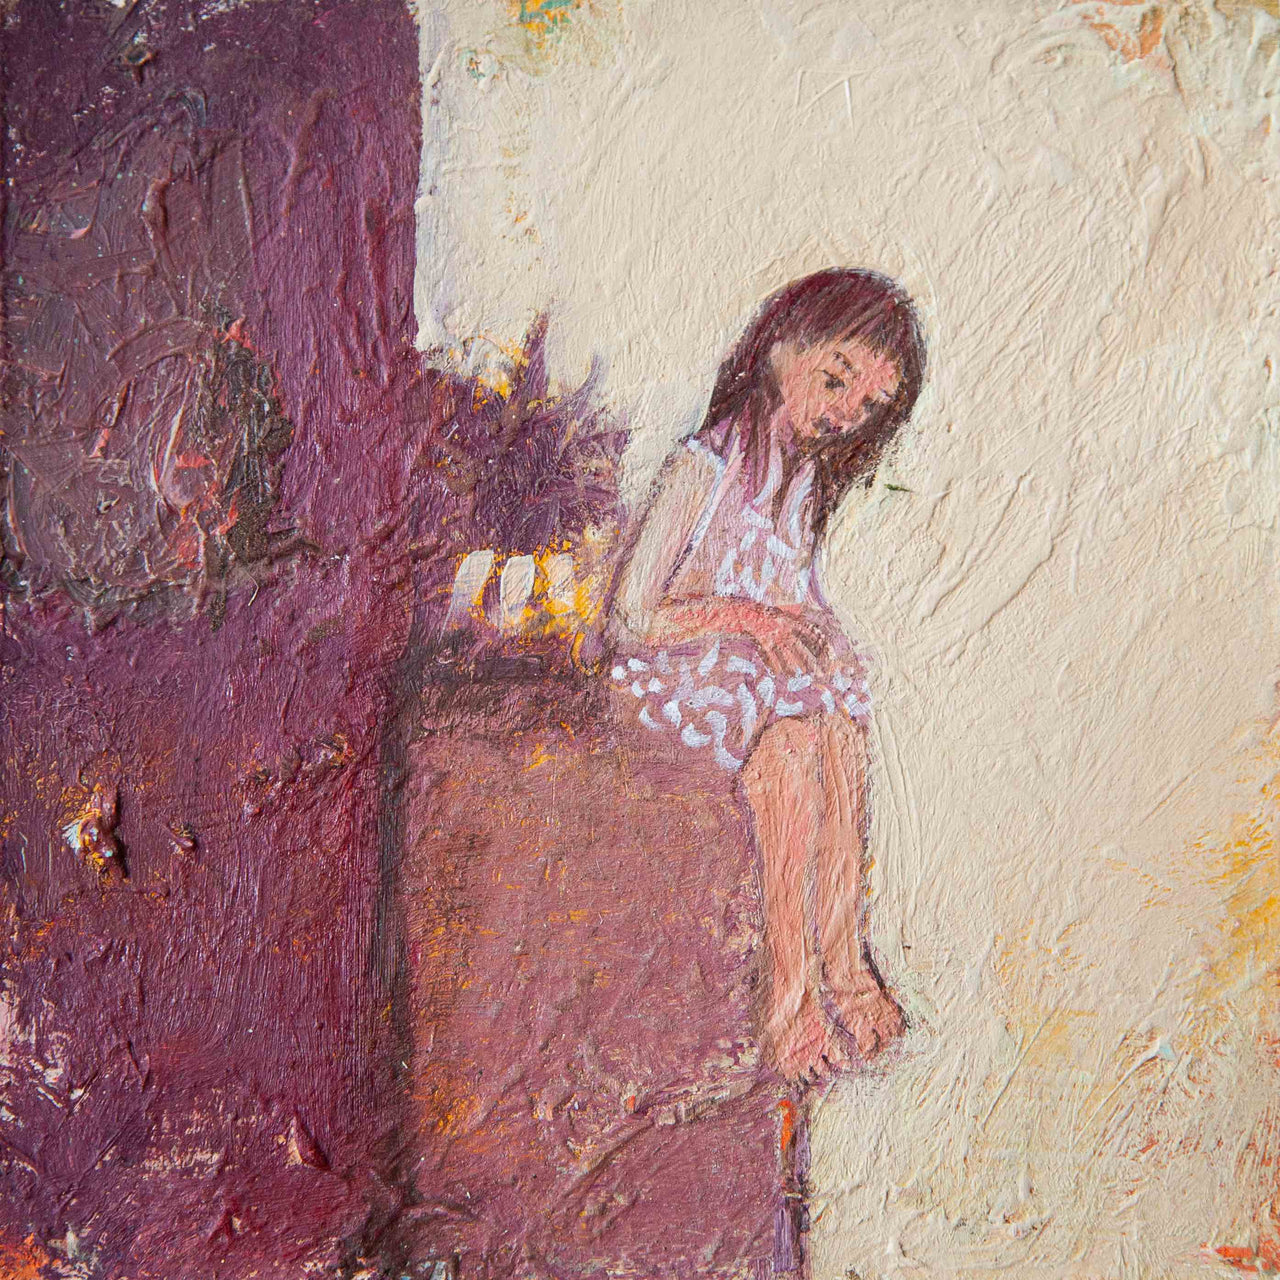 Siobhan Purdy painting of a girl sat alone in purples and neutrals 